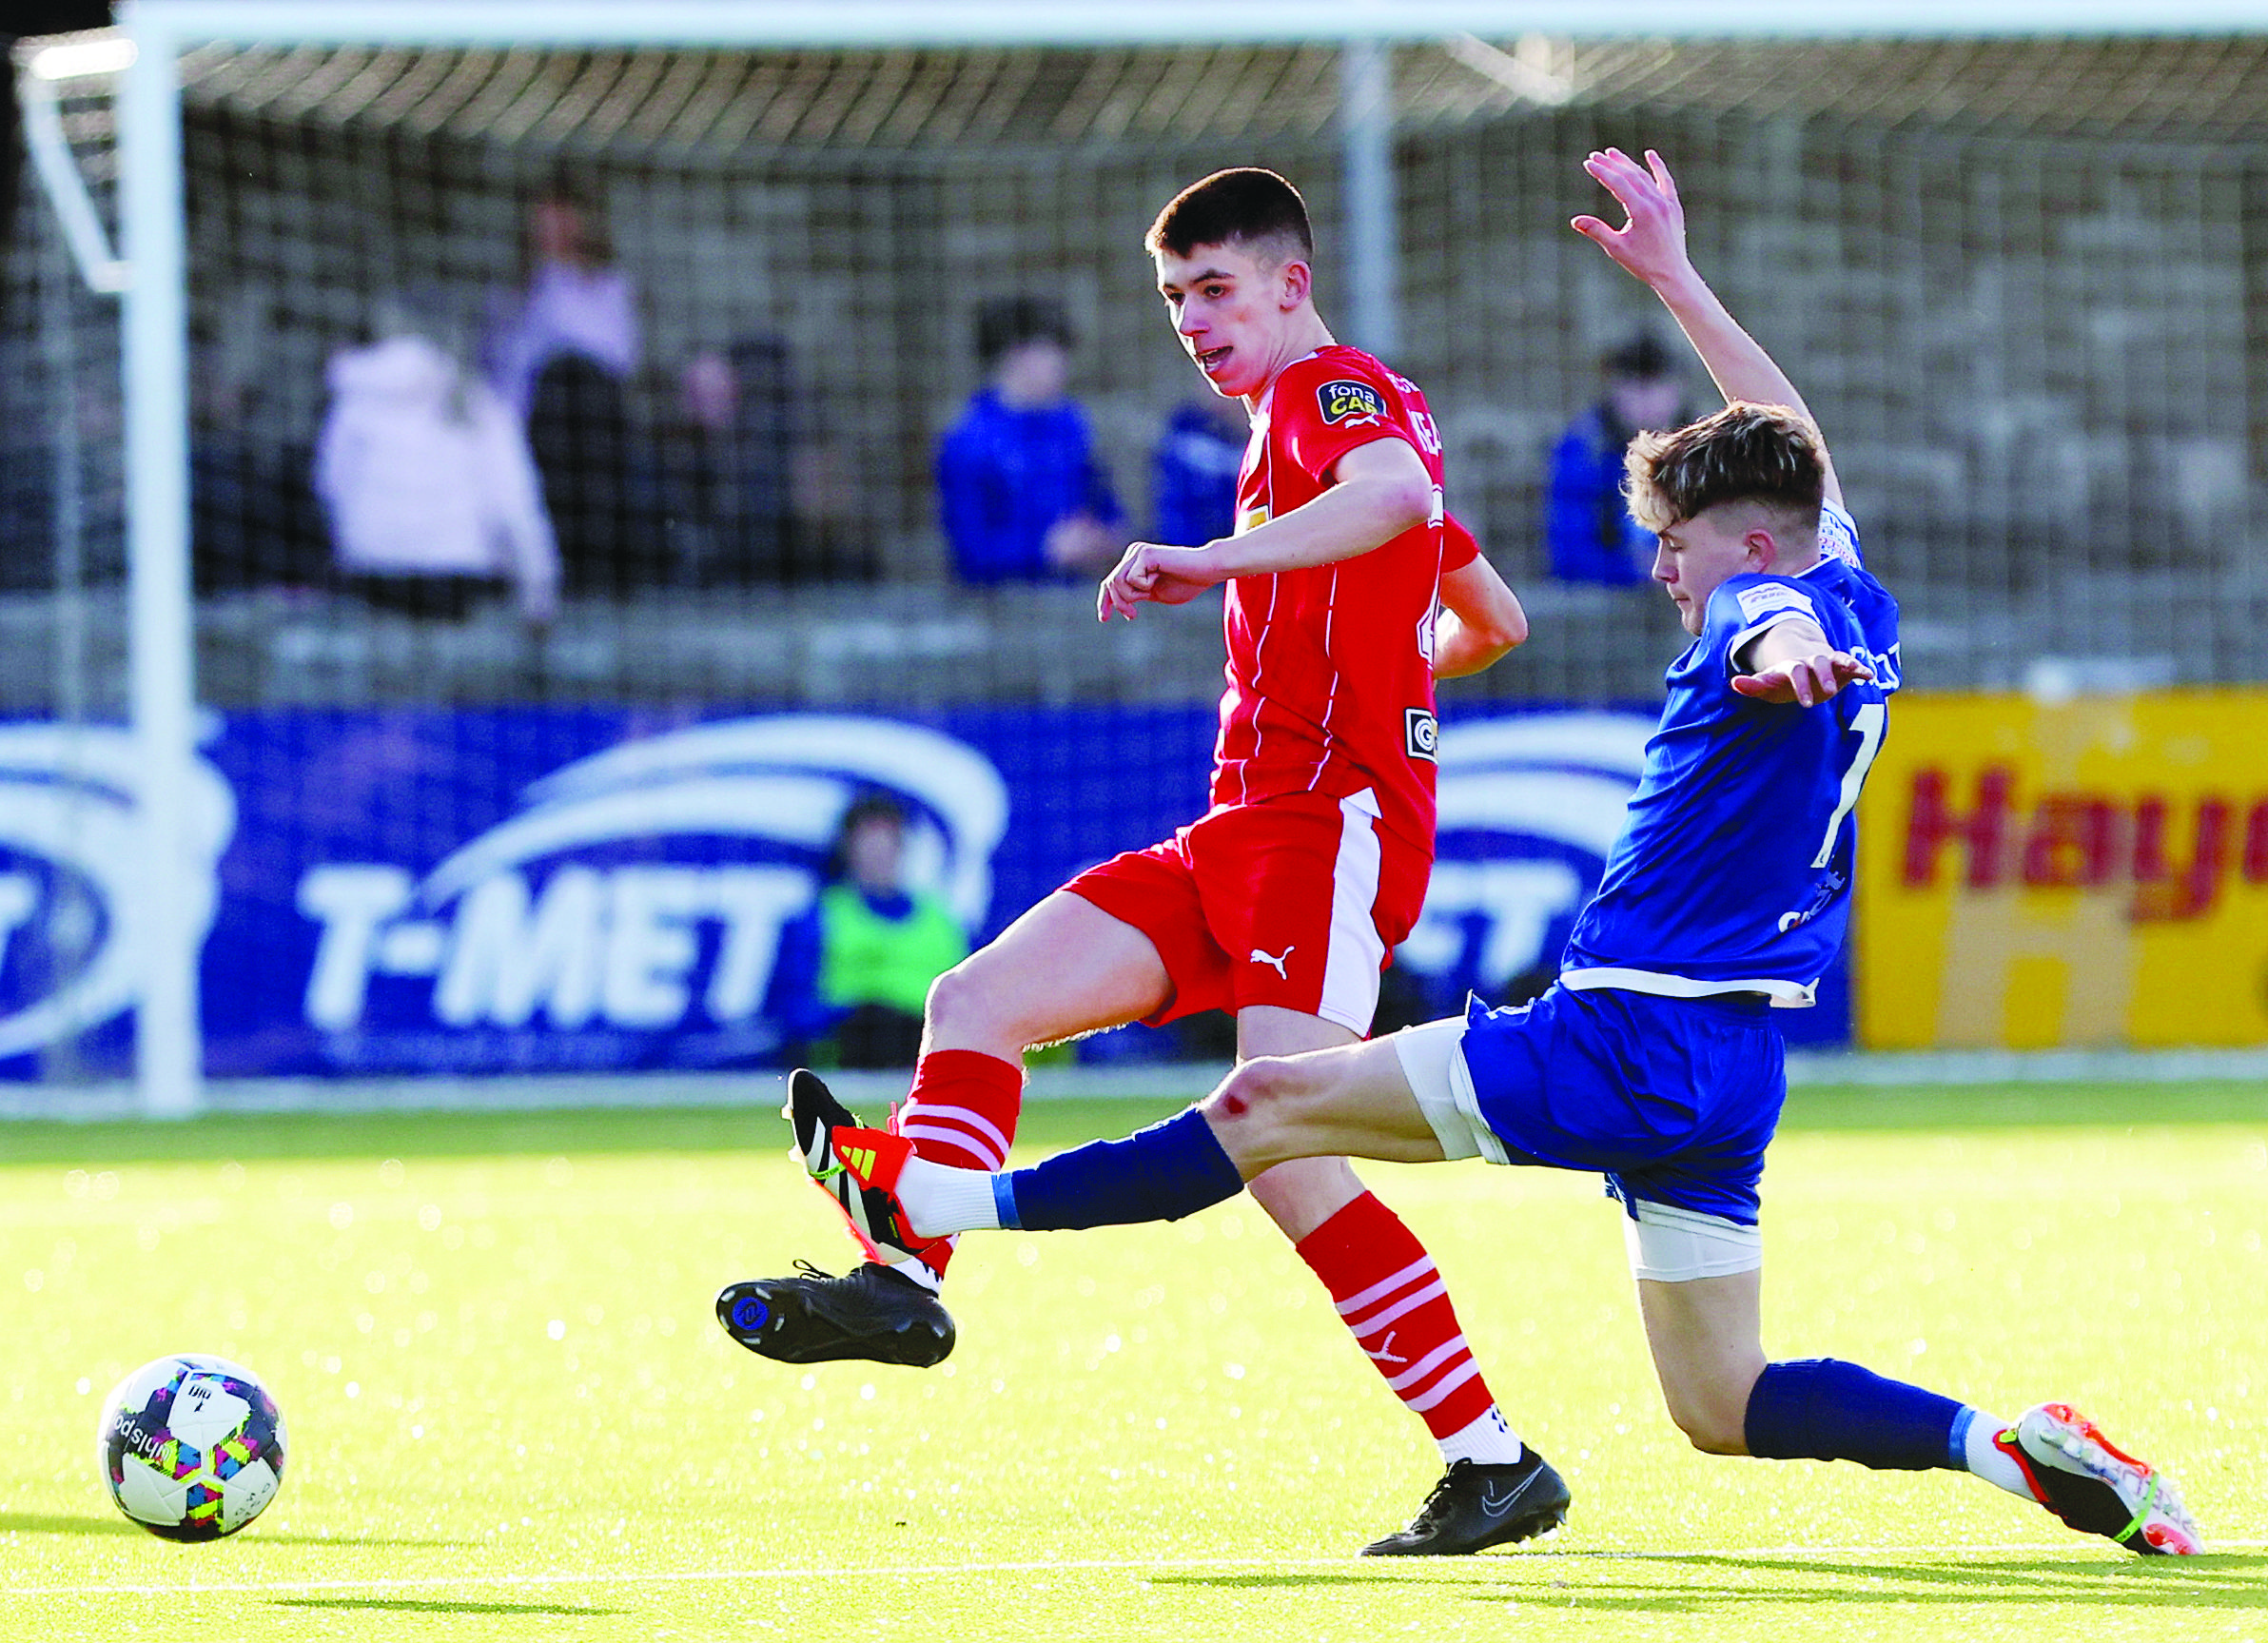 Shea Kearney’s performances have earned him a place as a standby for the NI U21 squad